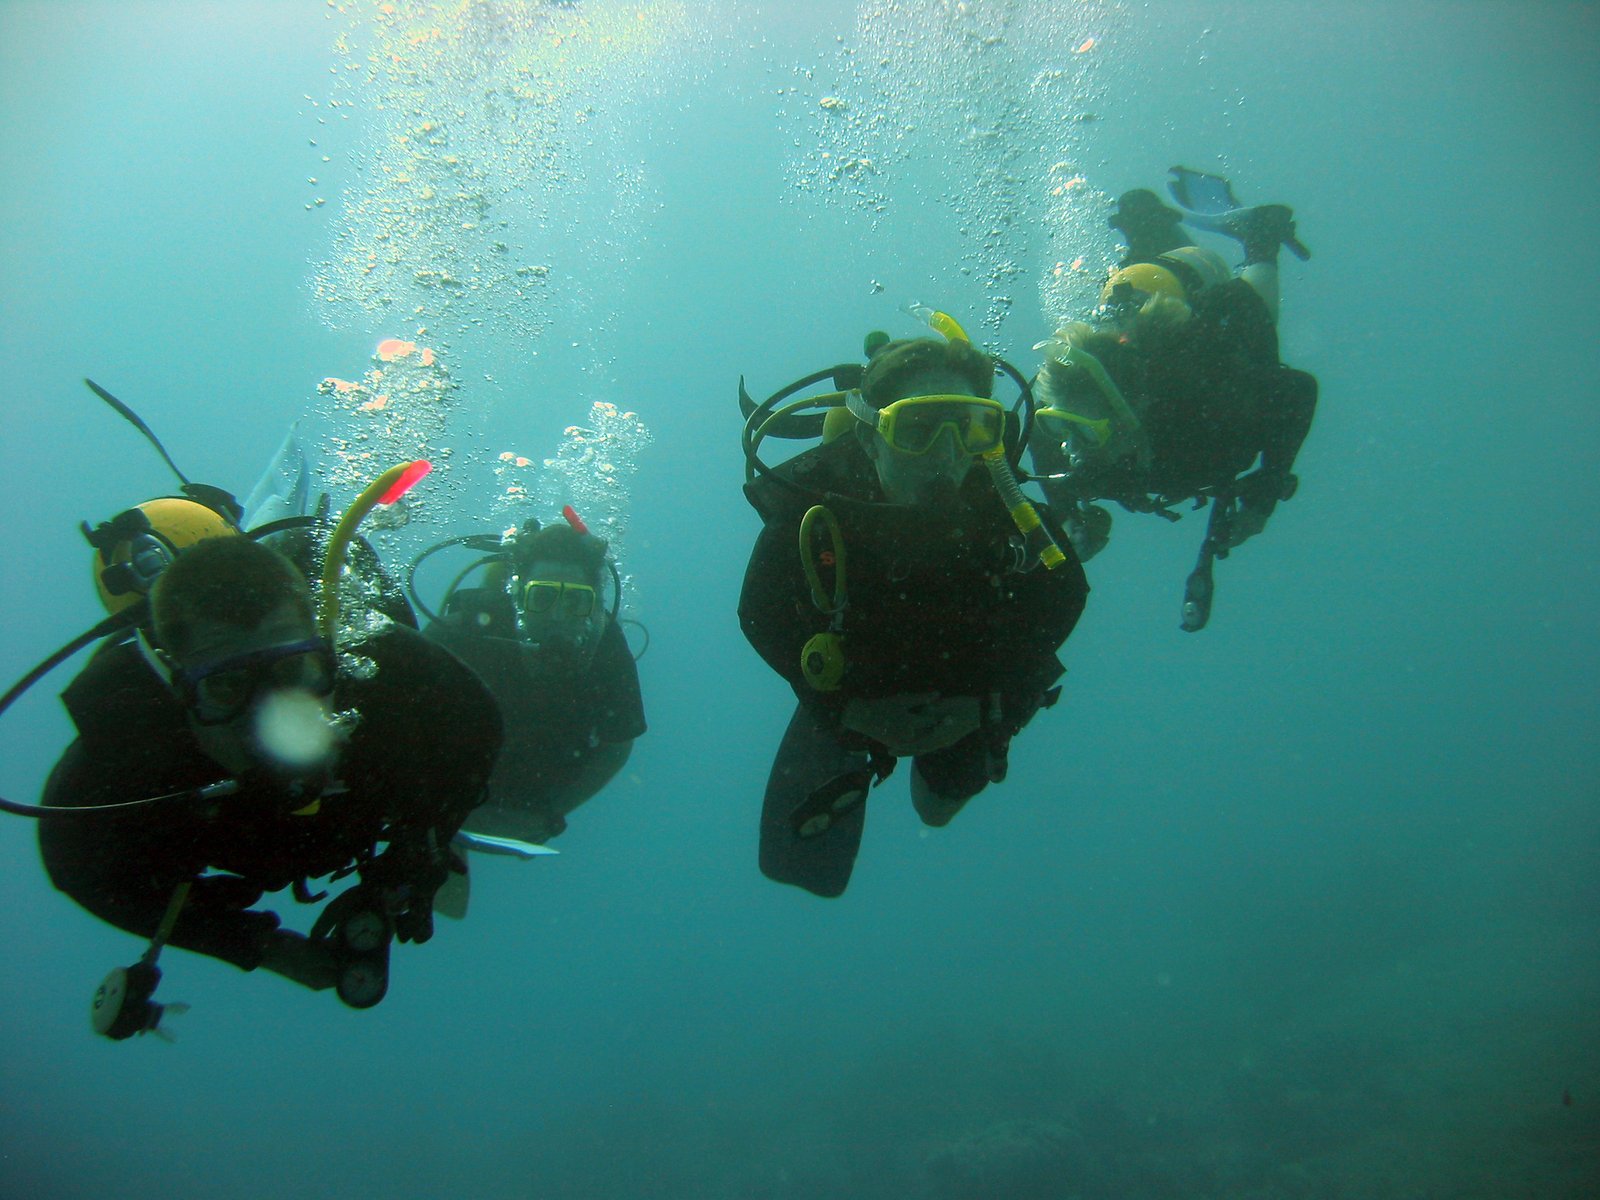 three scuba divers take off in clear blue water